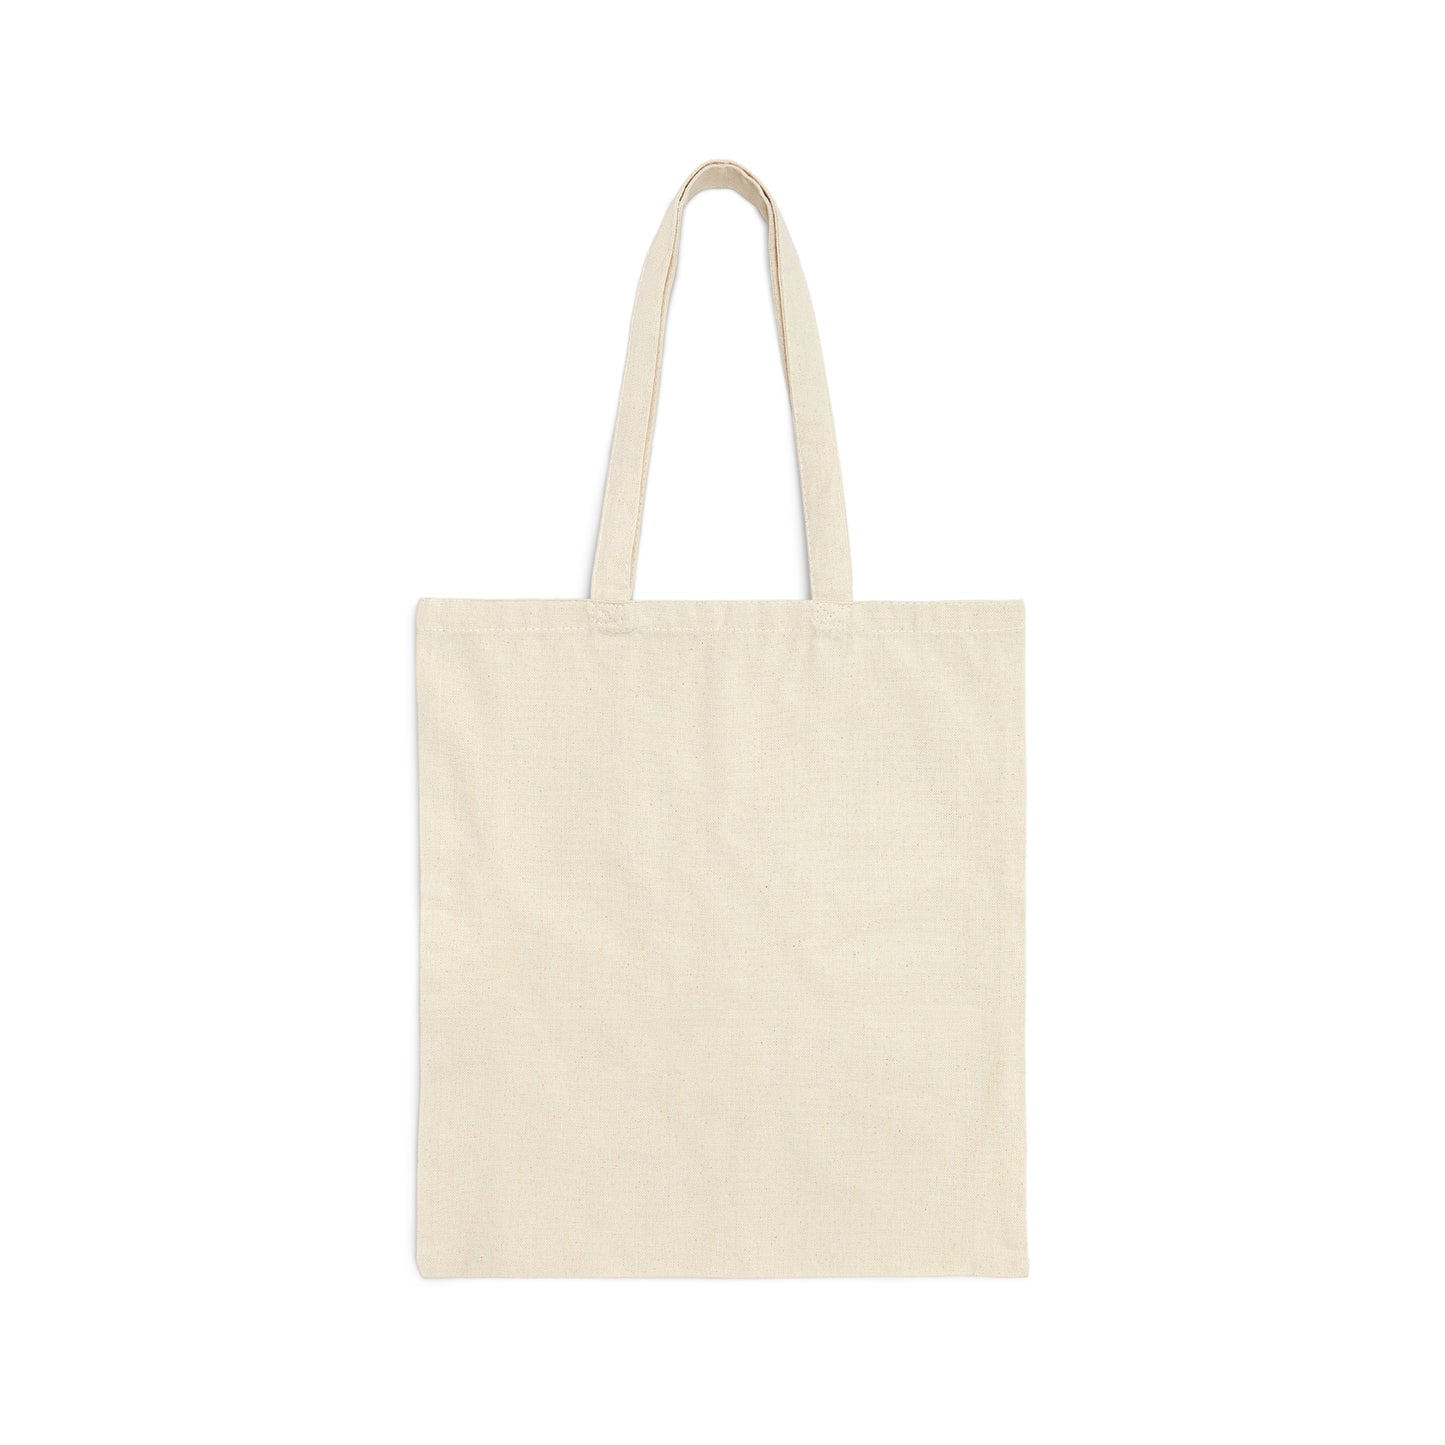 TOTE BAG GIFT WITH WORD PASSIONATE